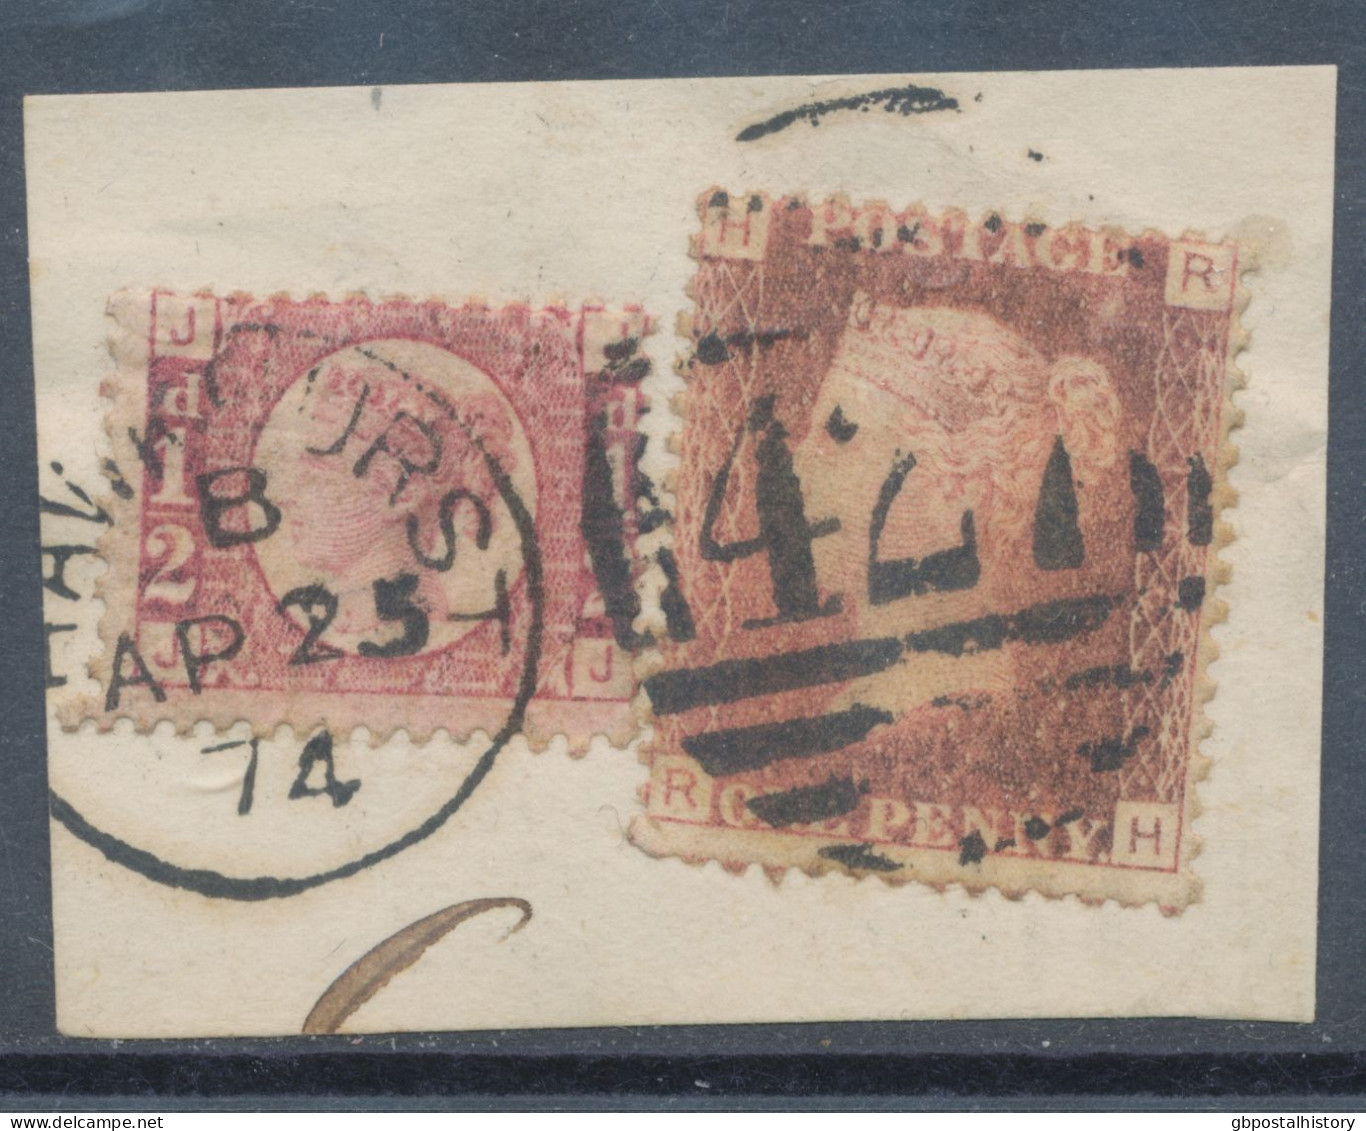 GB QV ½d Plate 4 (JJ) Together With 1d Plate 166 (RH) Superb Used On Piece With Duplex „HAWKHURST / 427“, Kent (4VODA, U - Used Stamps